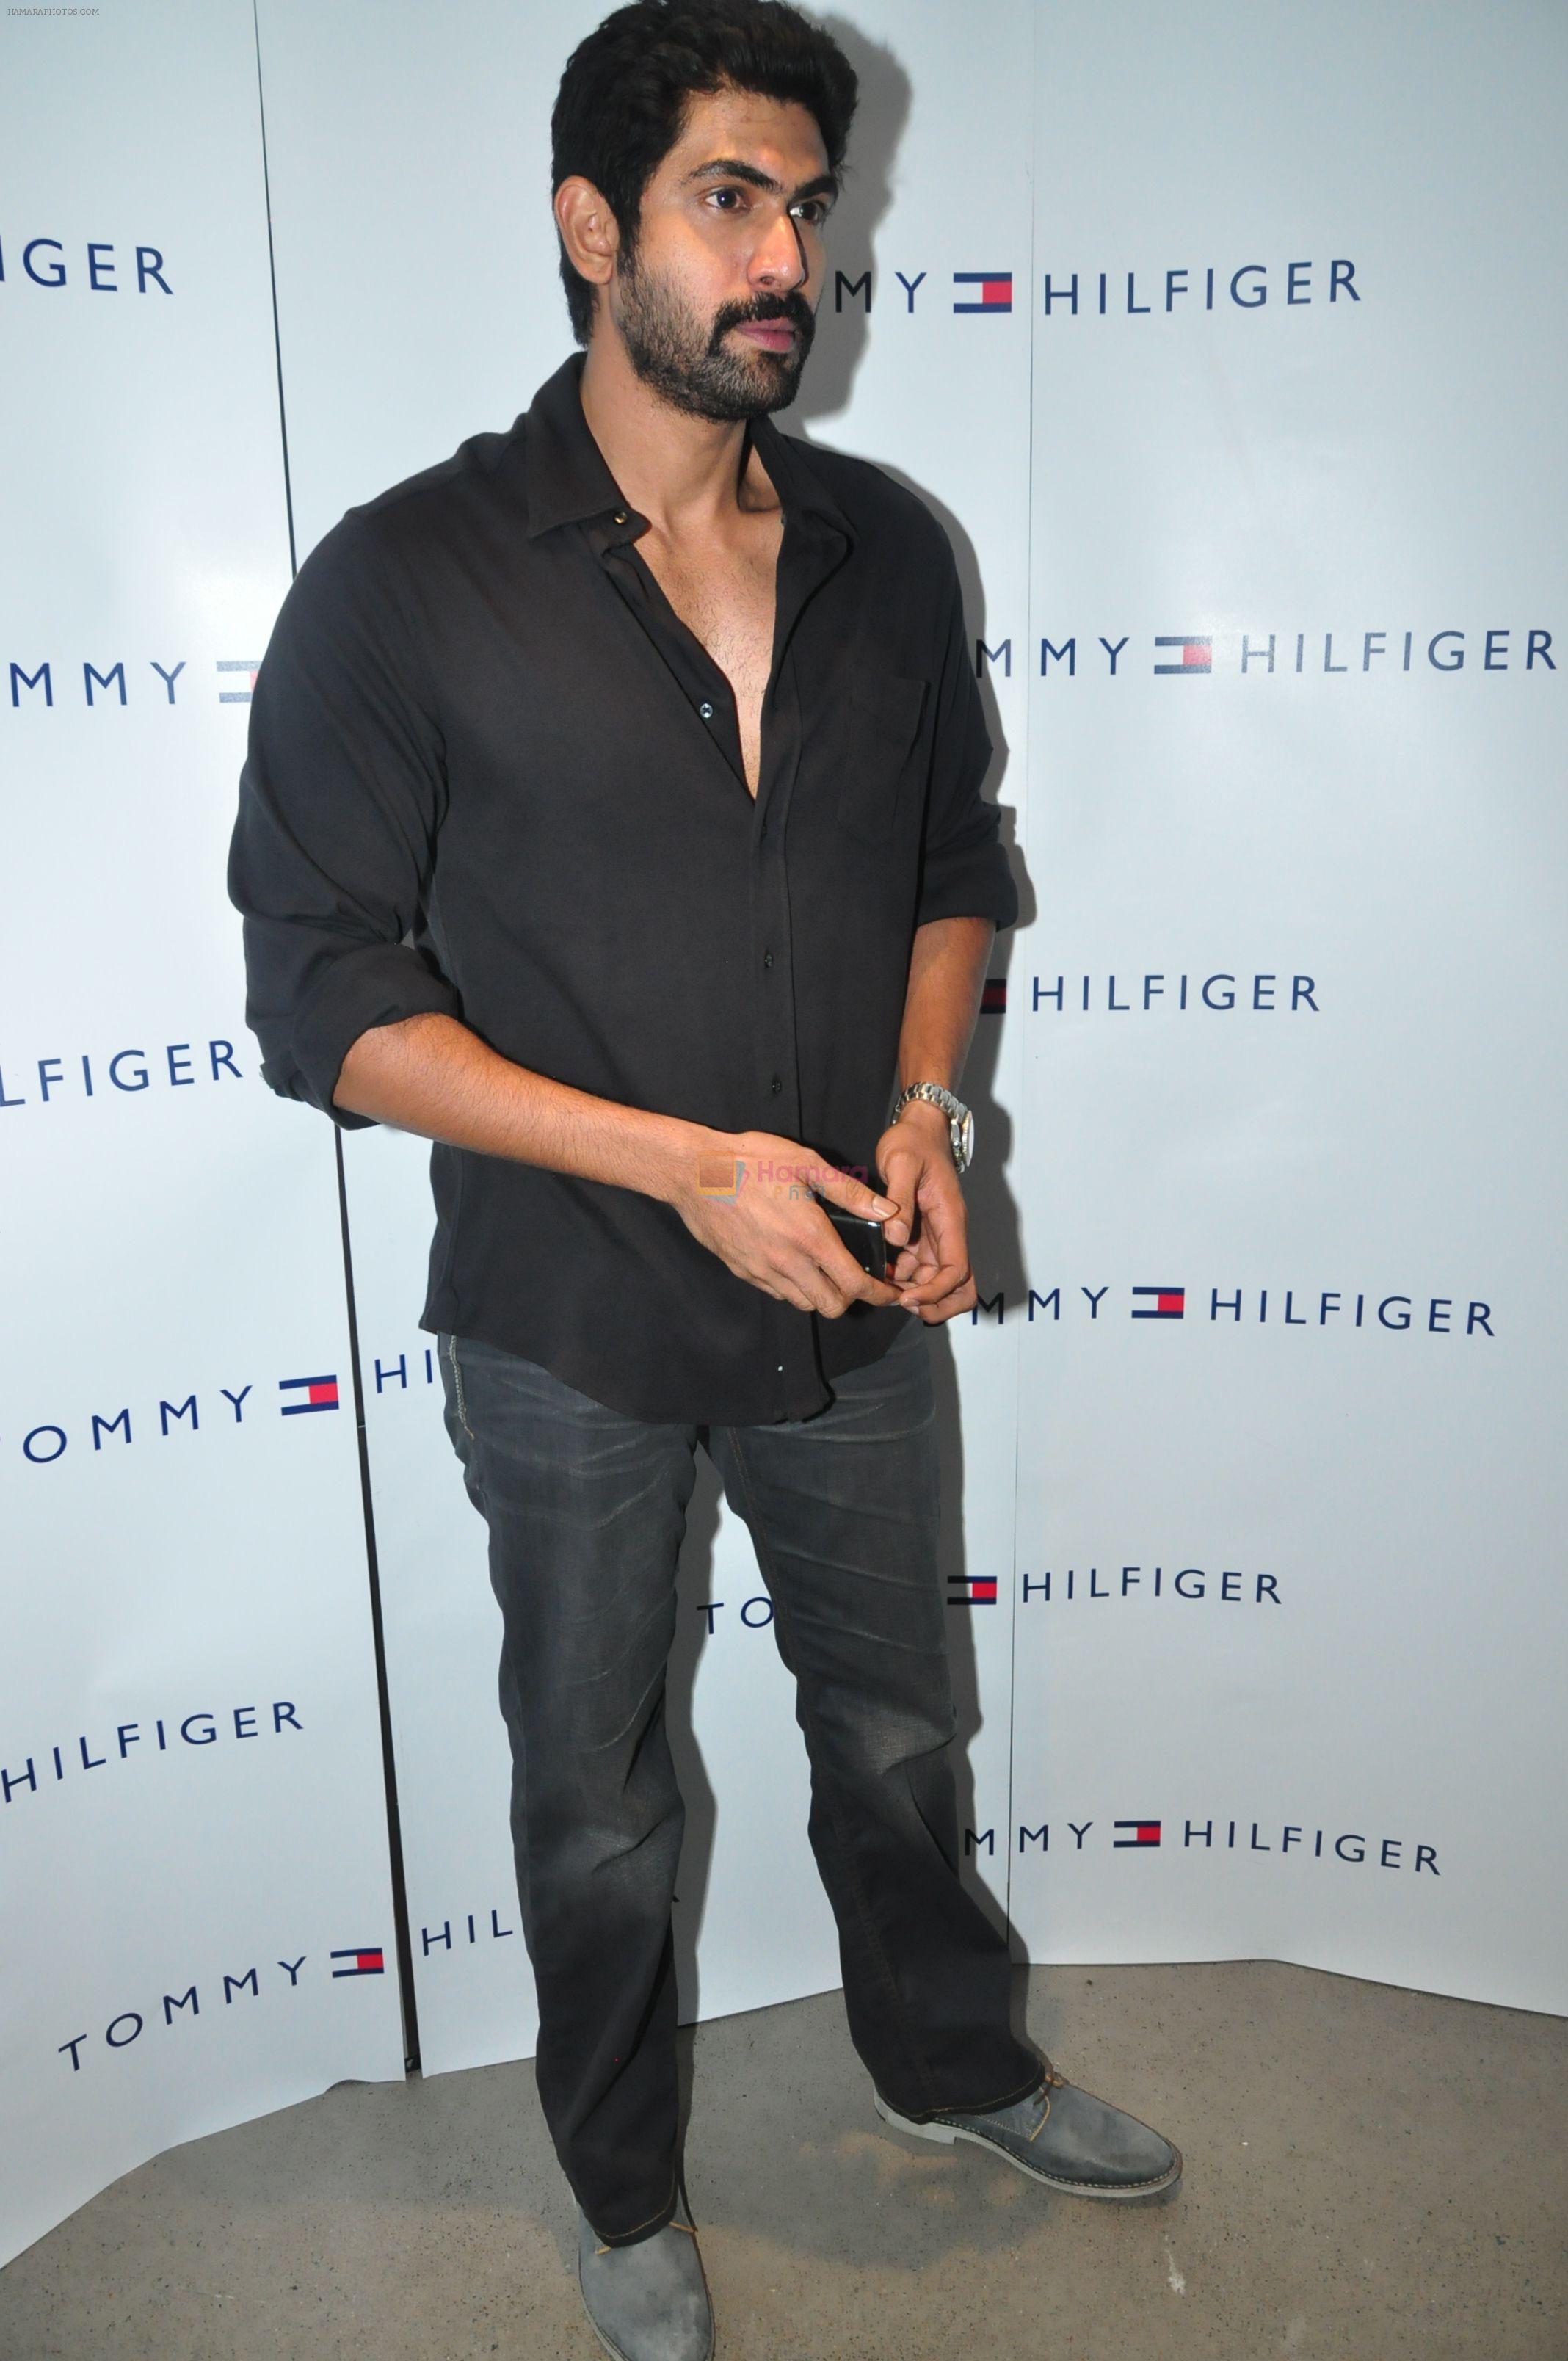 Rana Daggubati attends Tommy Hilfiger Showroom Relaunch Party held at  Kismet Pub, Park Hotel, Hyderabad on 17th September 2011 / Most Viewed  Bollywood Photos - Bollywood Photos